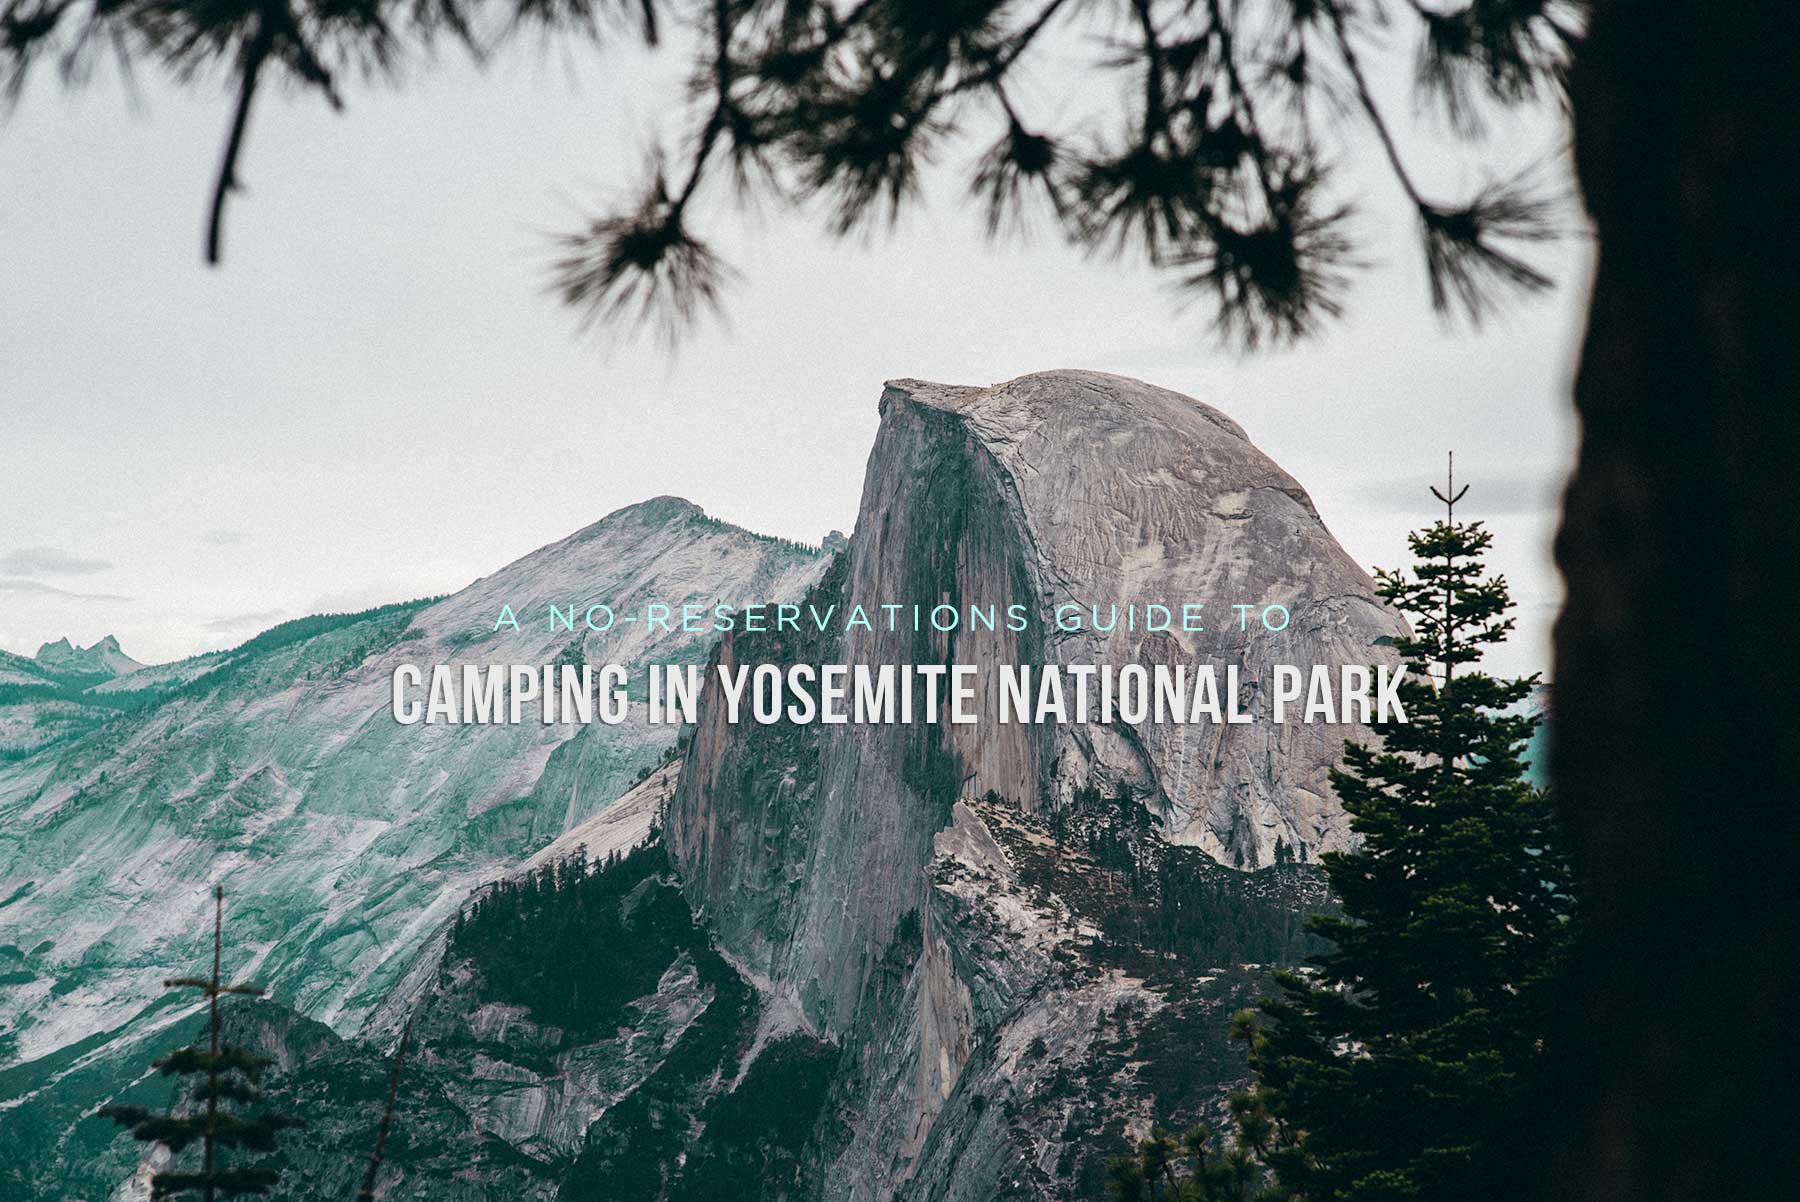 A No Reservations Guide To Camping In Yosemite National Park